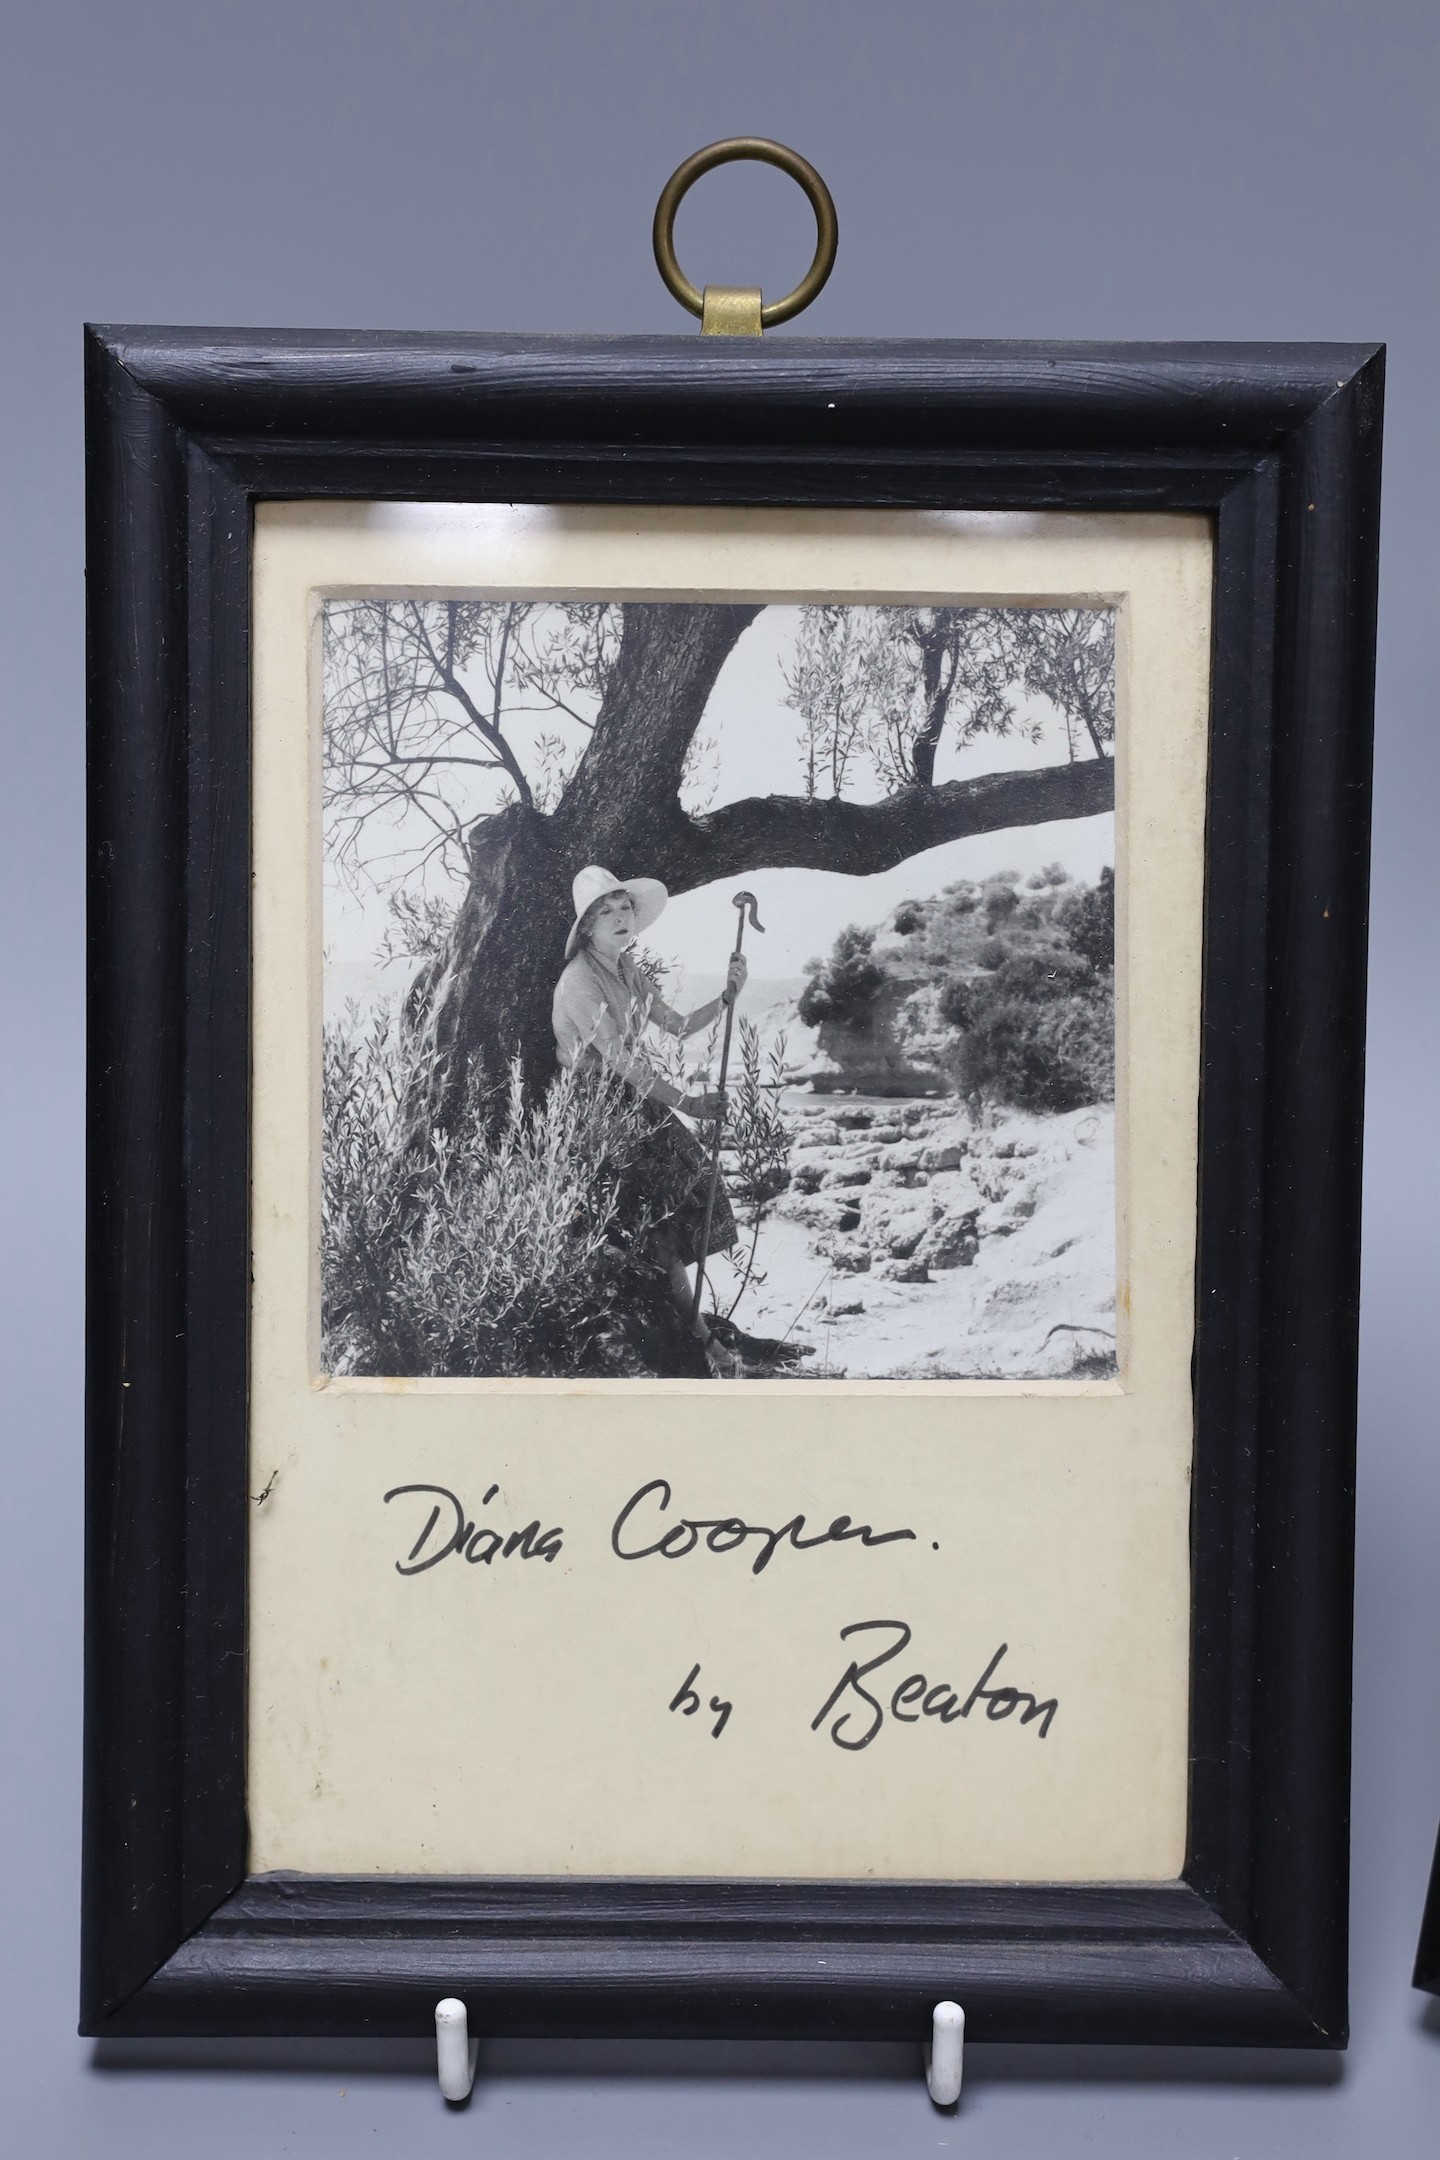 Two portrait photographs of Diana Cooper, inscribed ‘Diana Cooper by Beaton’